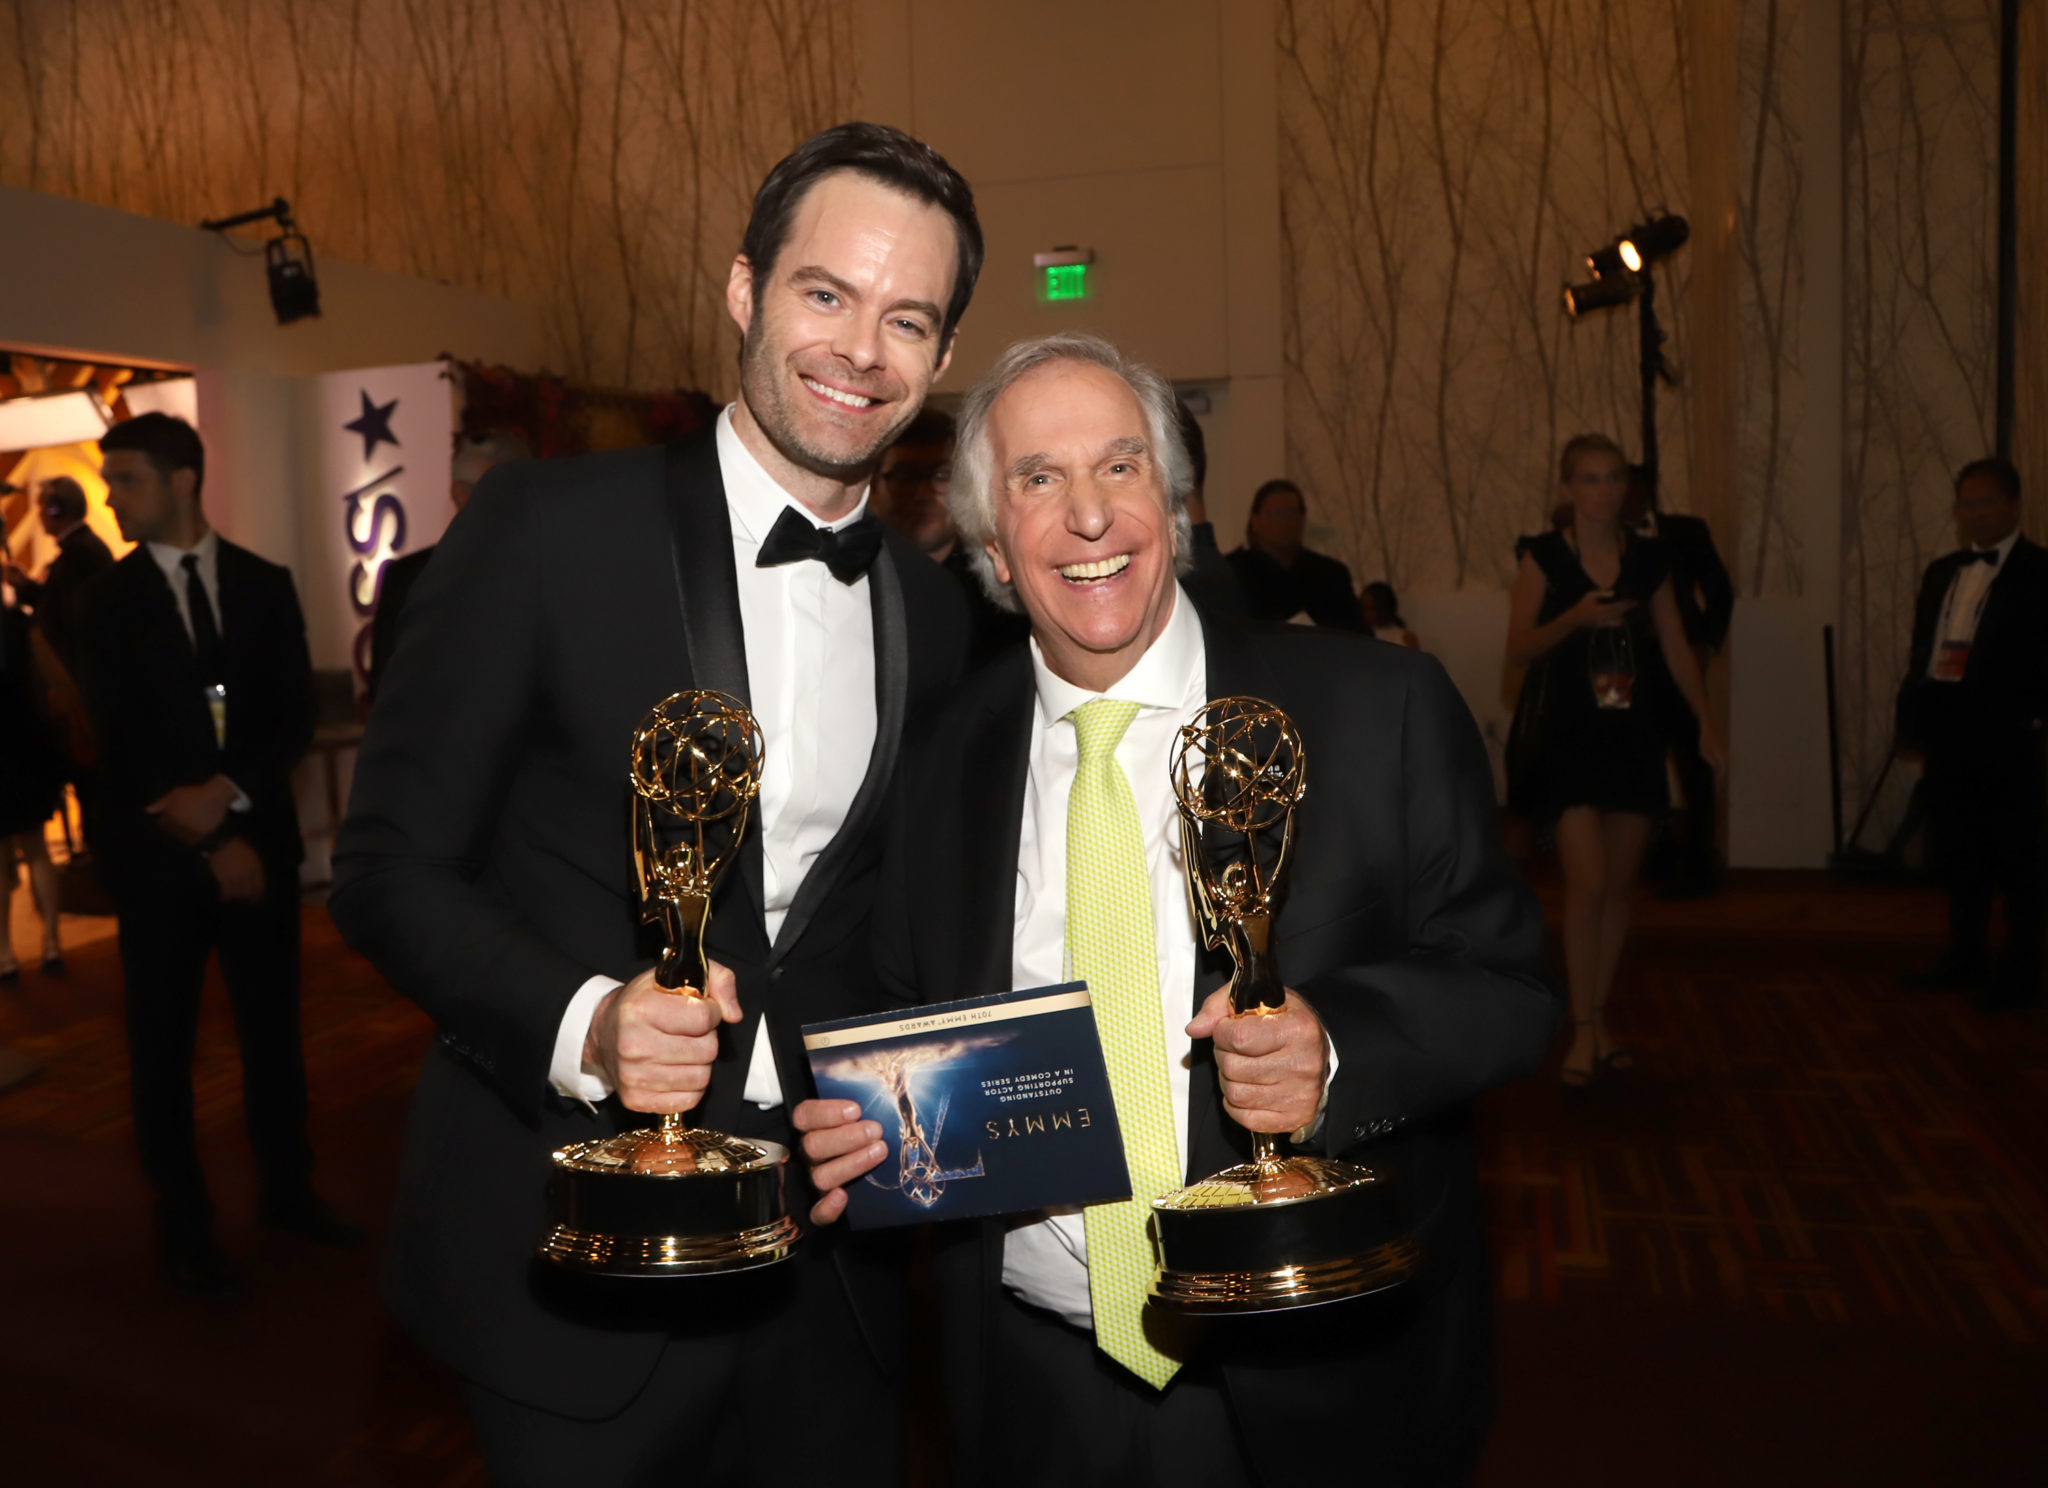 Bill Hader, Henry Winkler Emmys 2018 4chion lifestyle